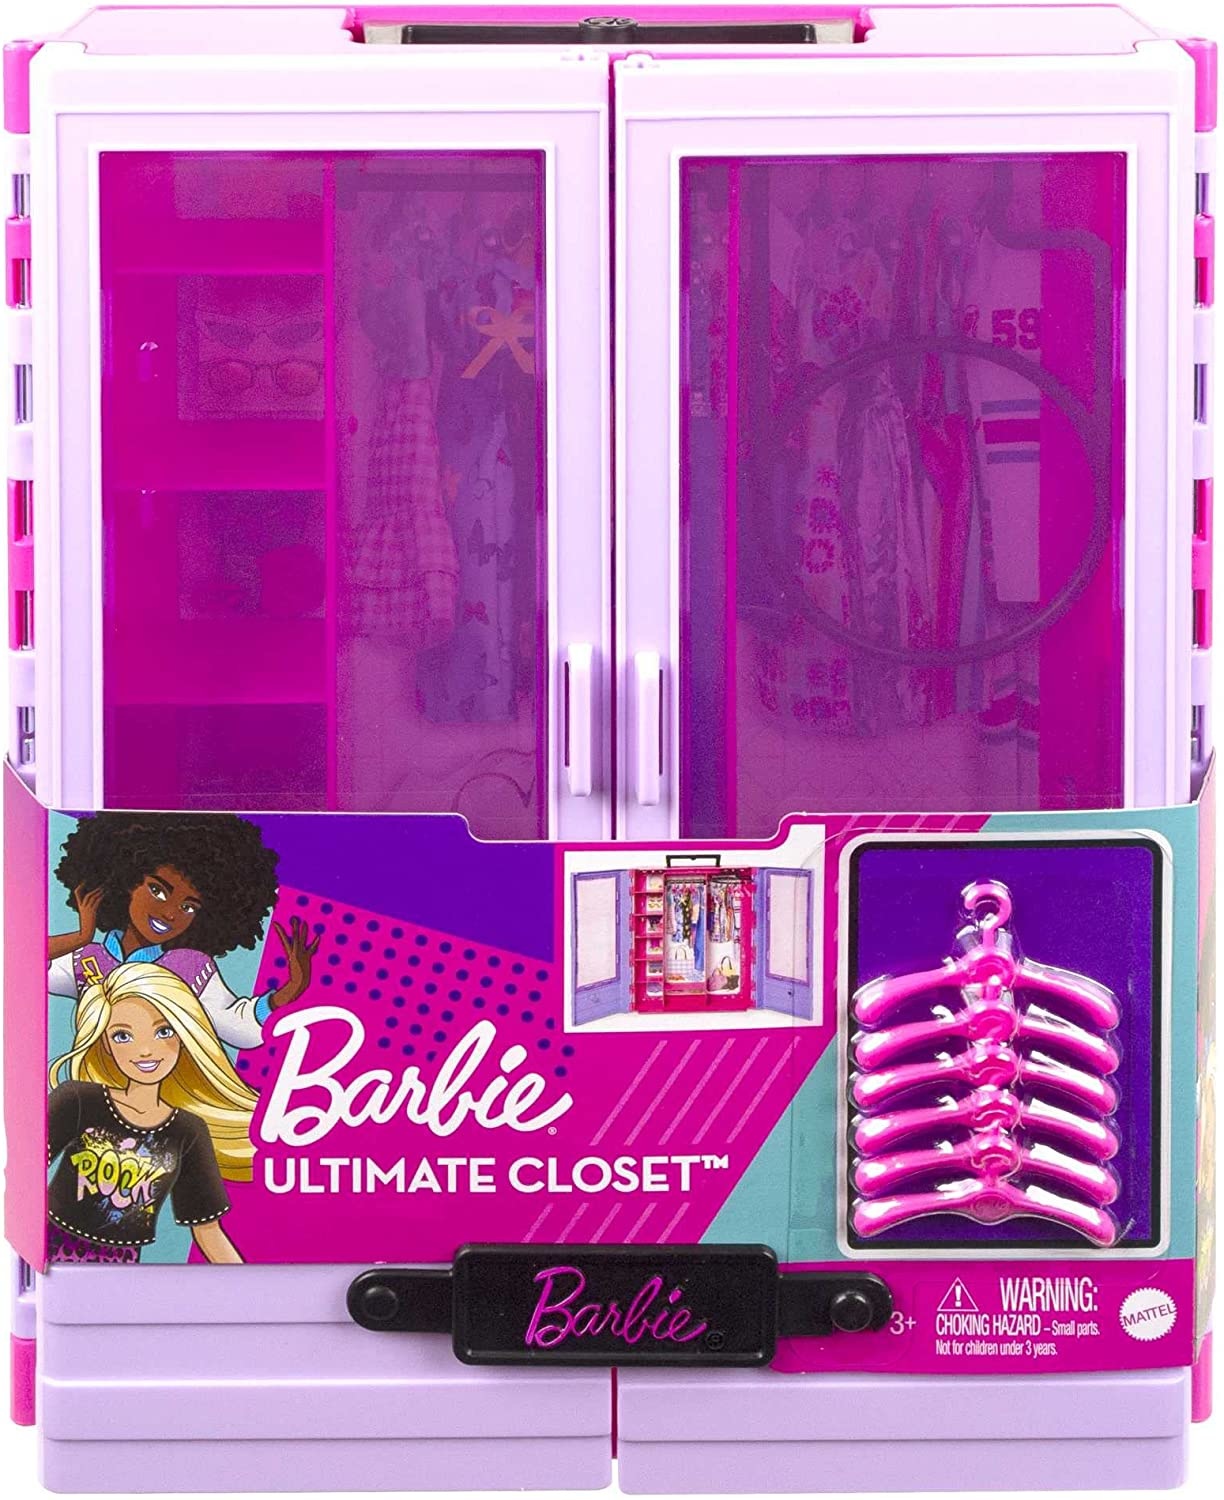 BARBIE ULTIMATE CLOSET - THE TOY STORE